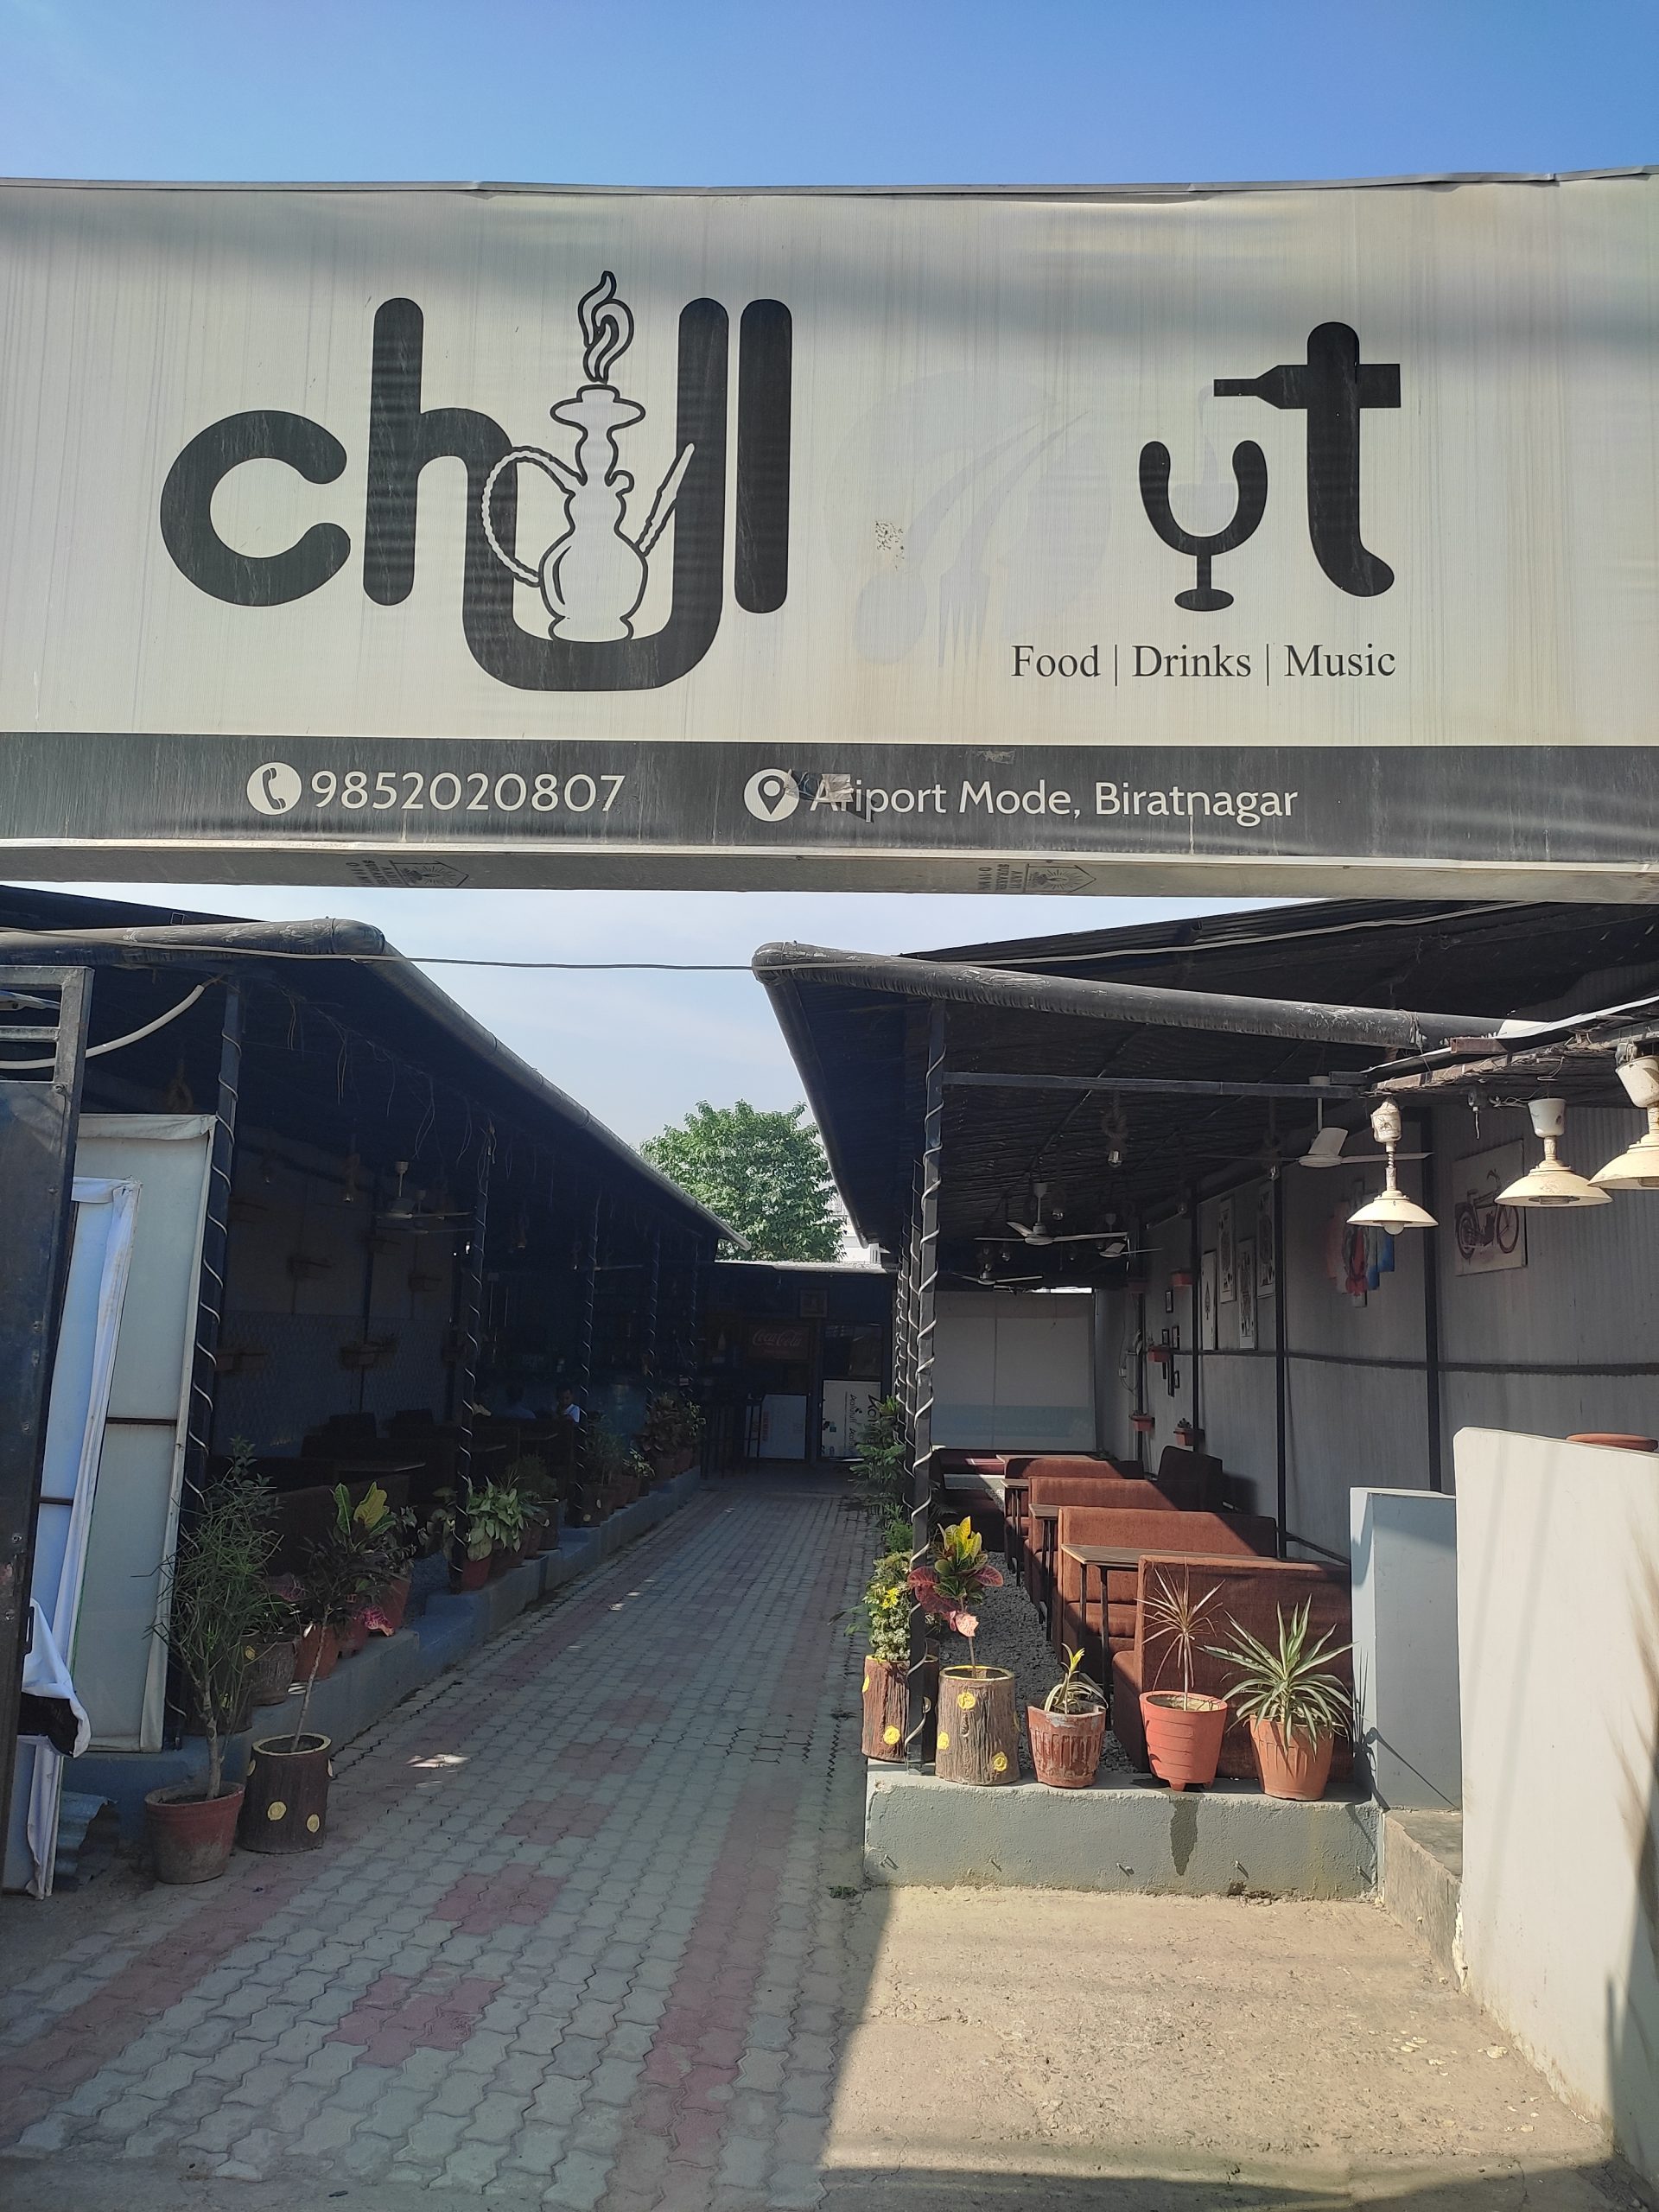 Chill Out Restaurant